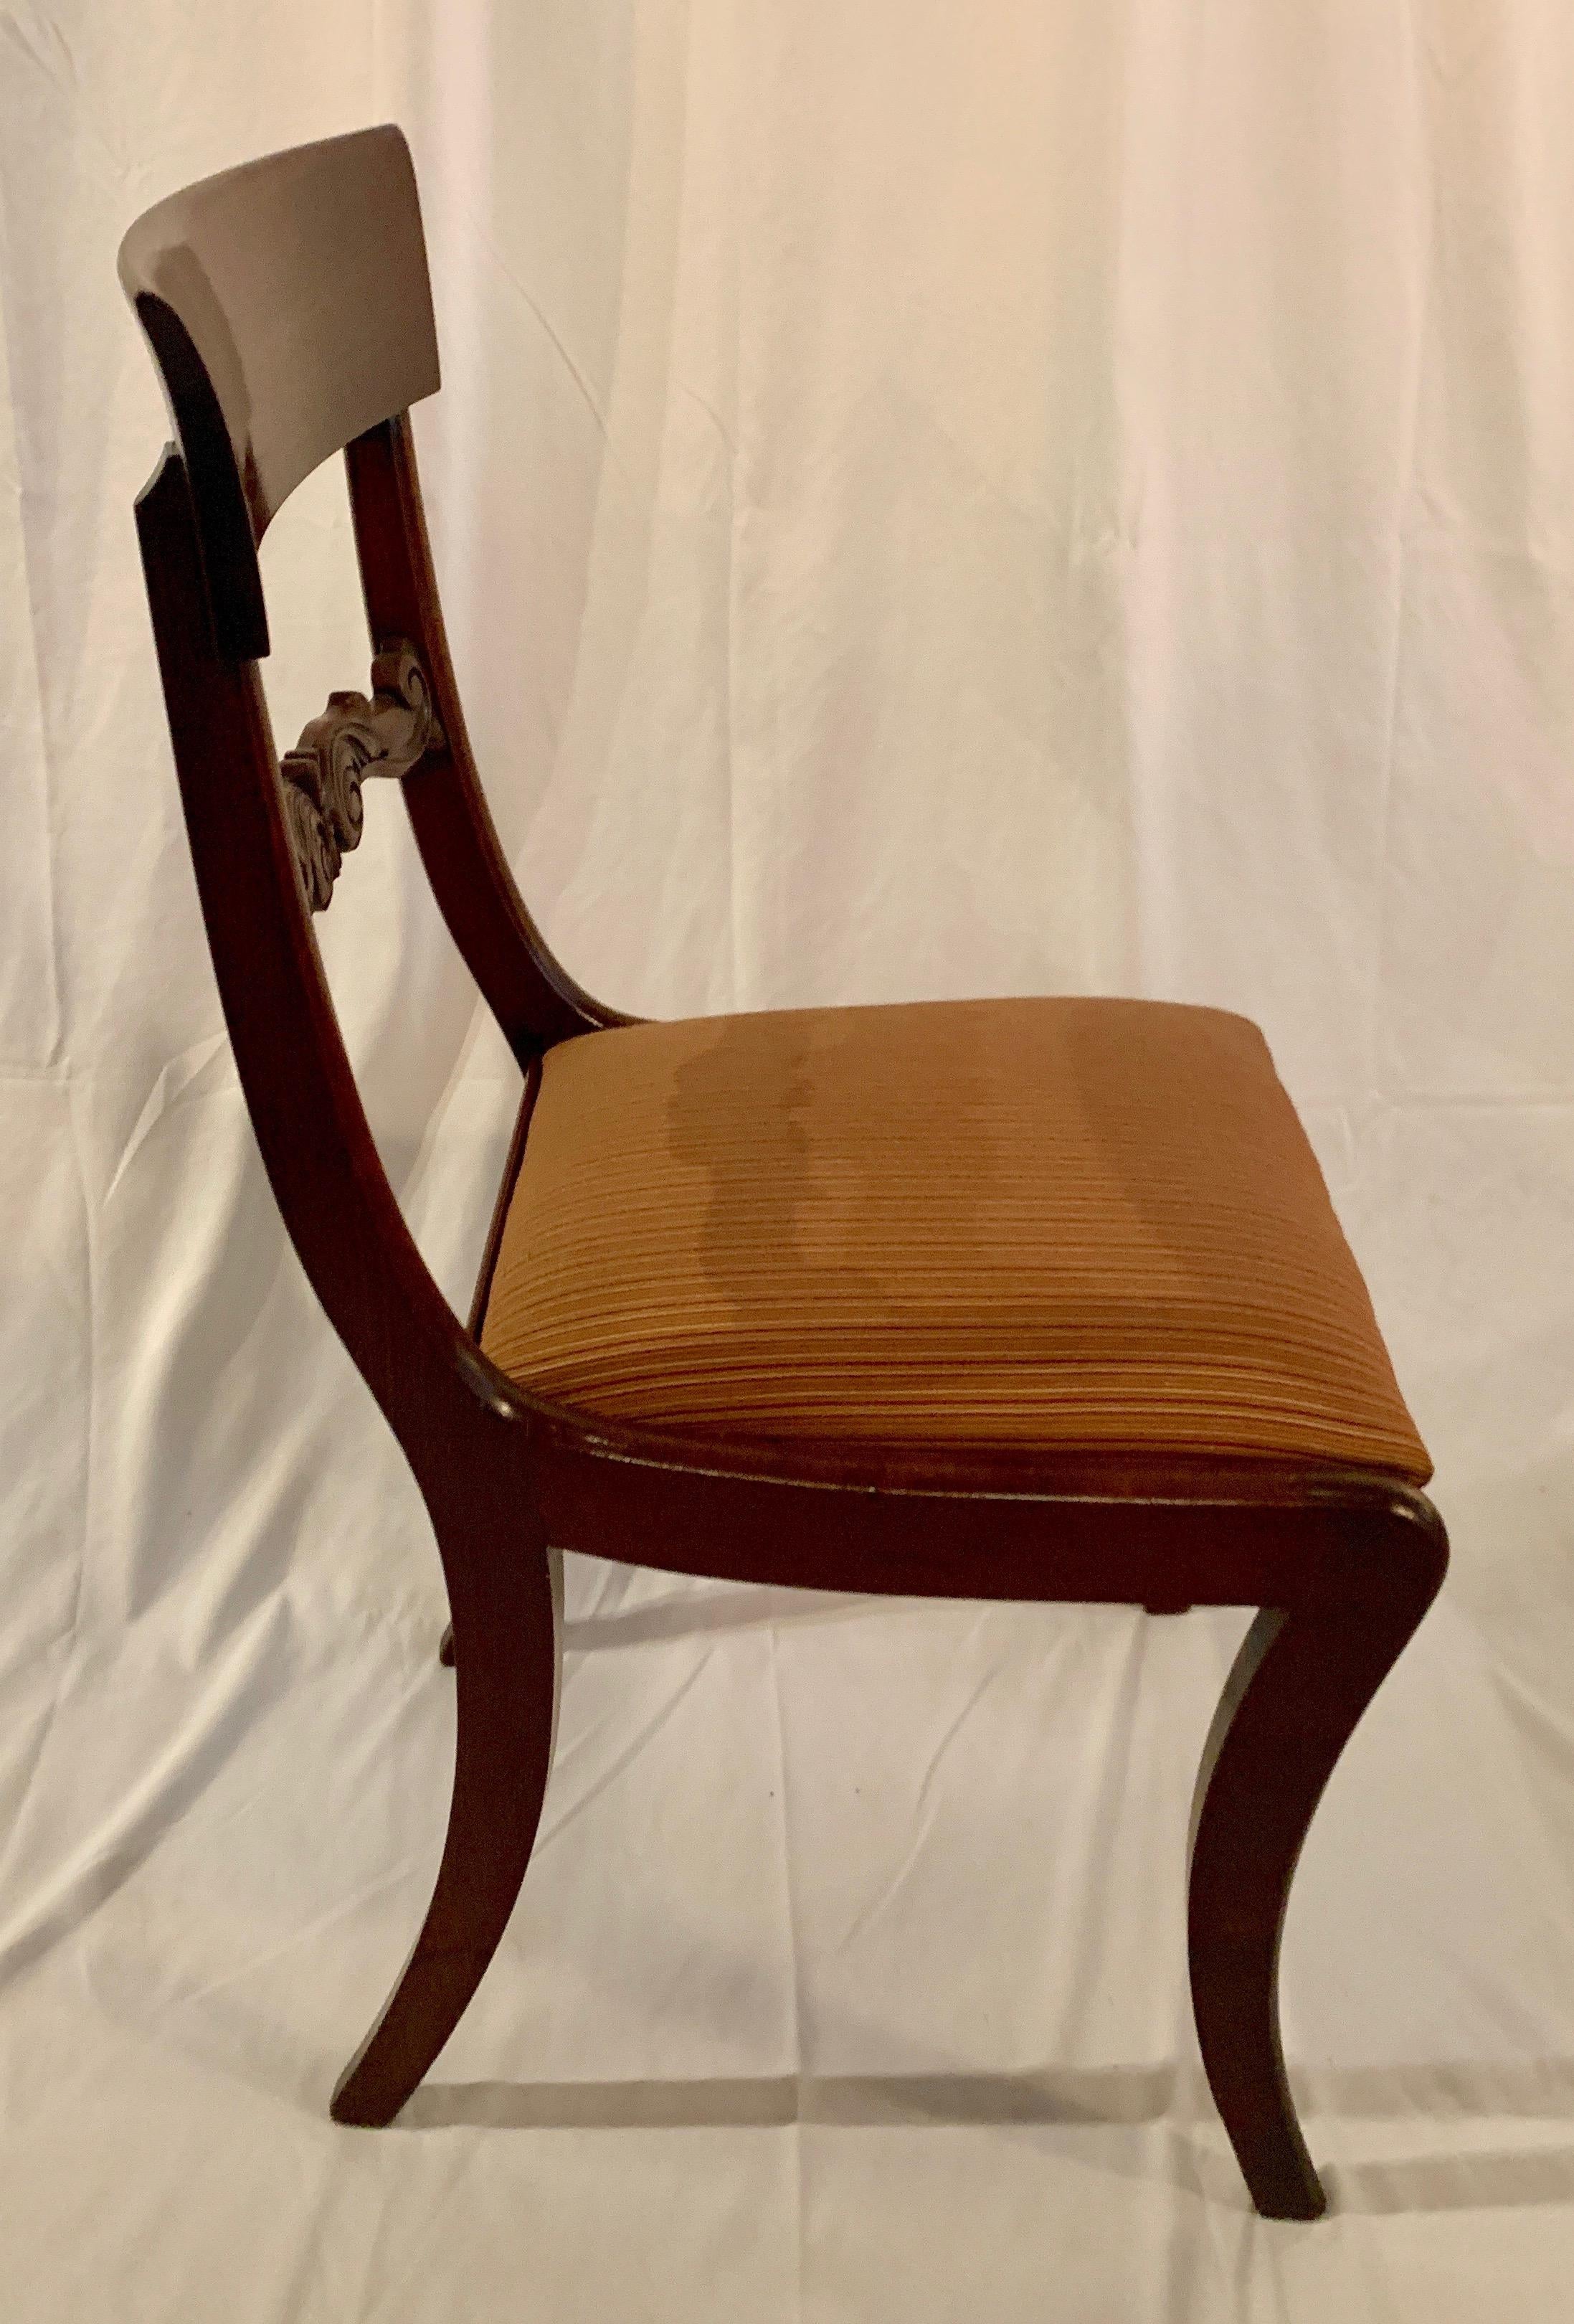 Set of antique Federal style chairs, circa 1890-1910
EDC016.